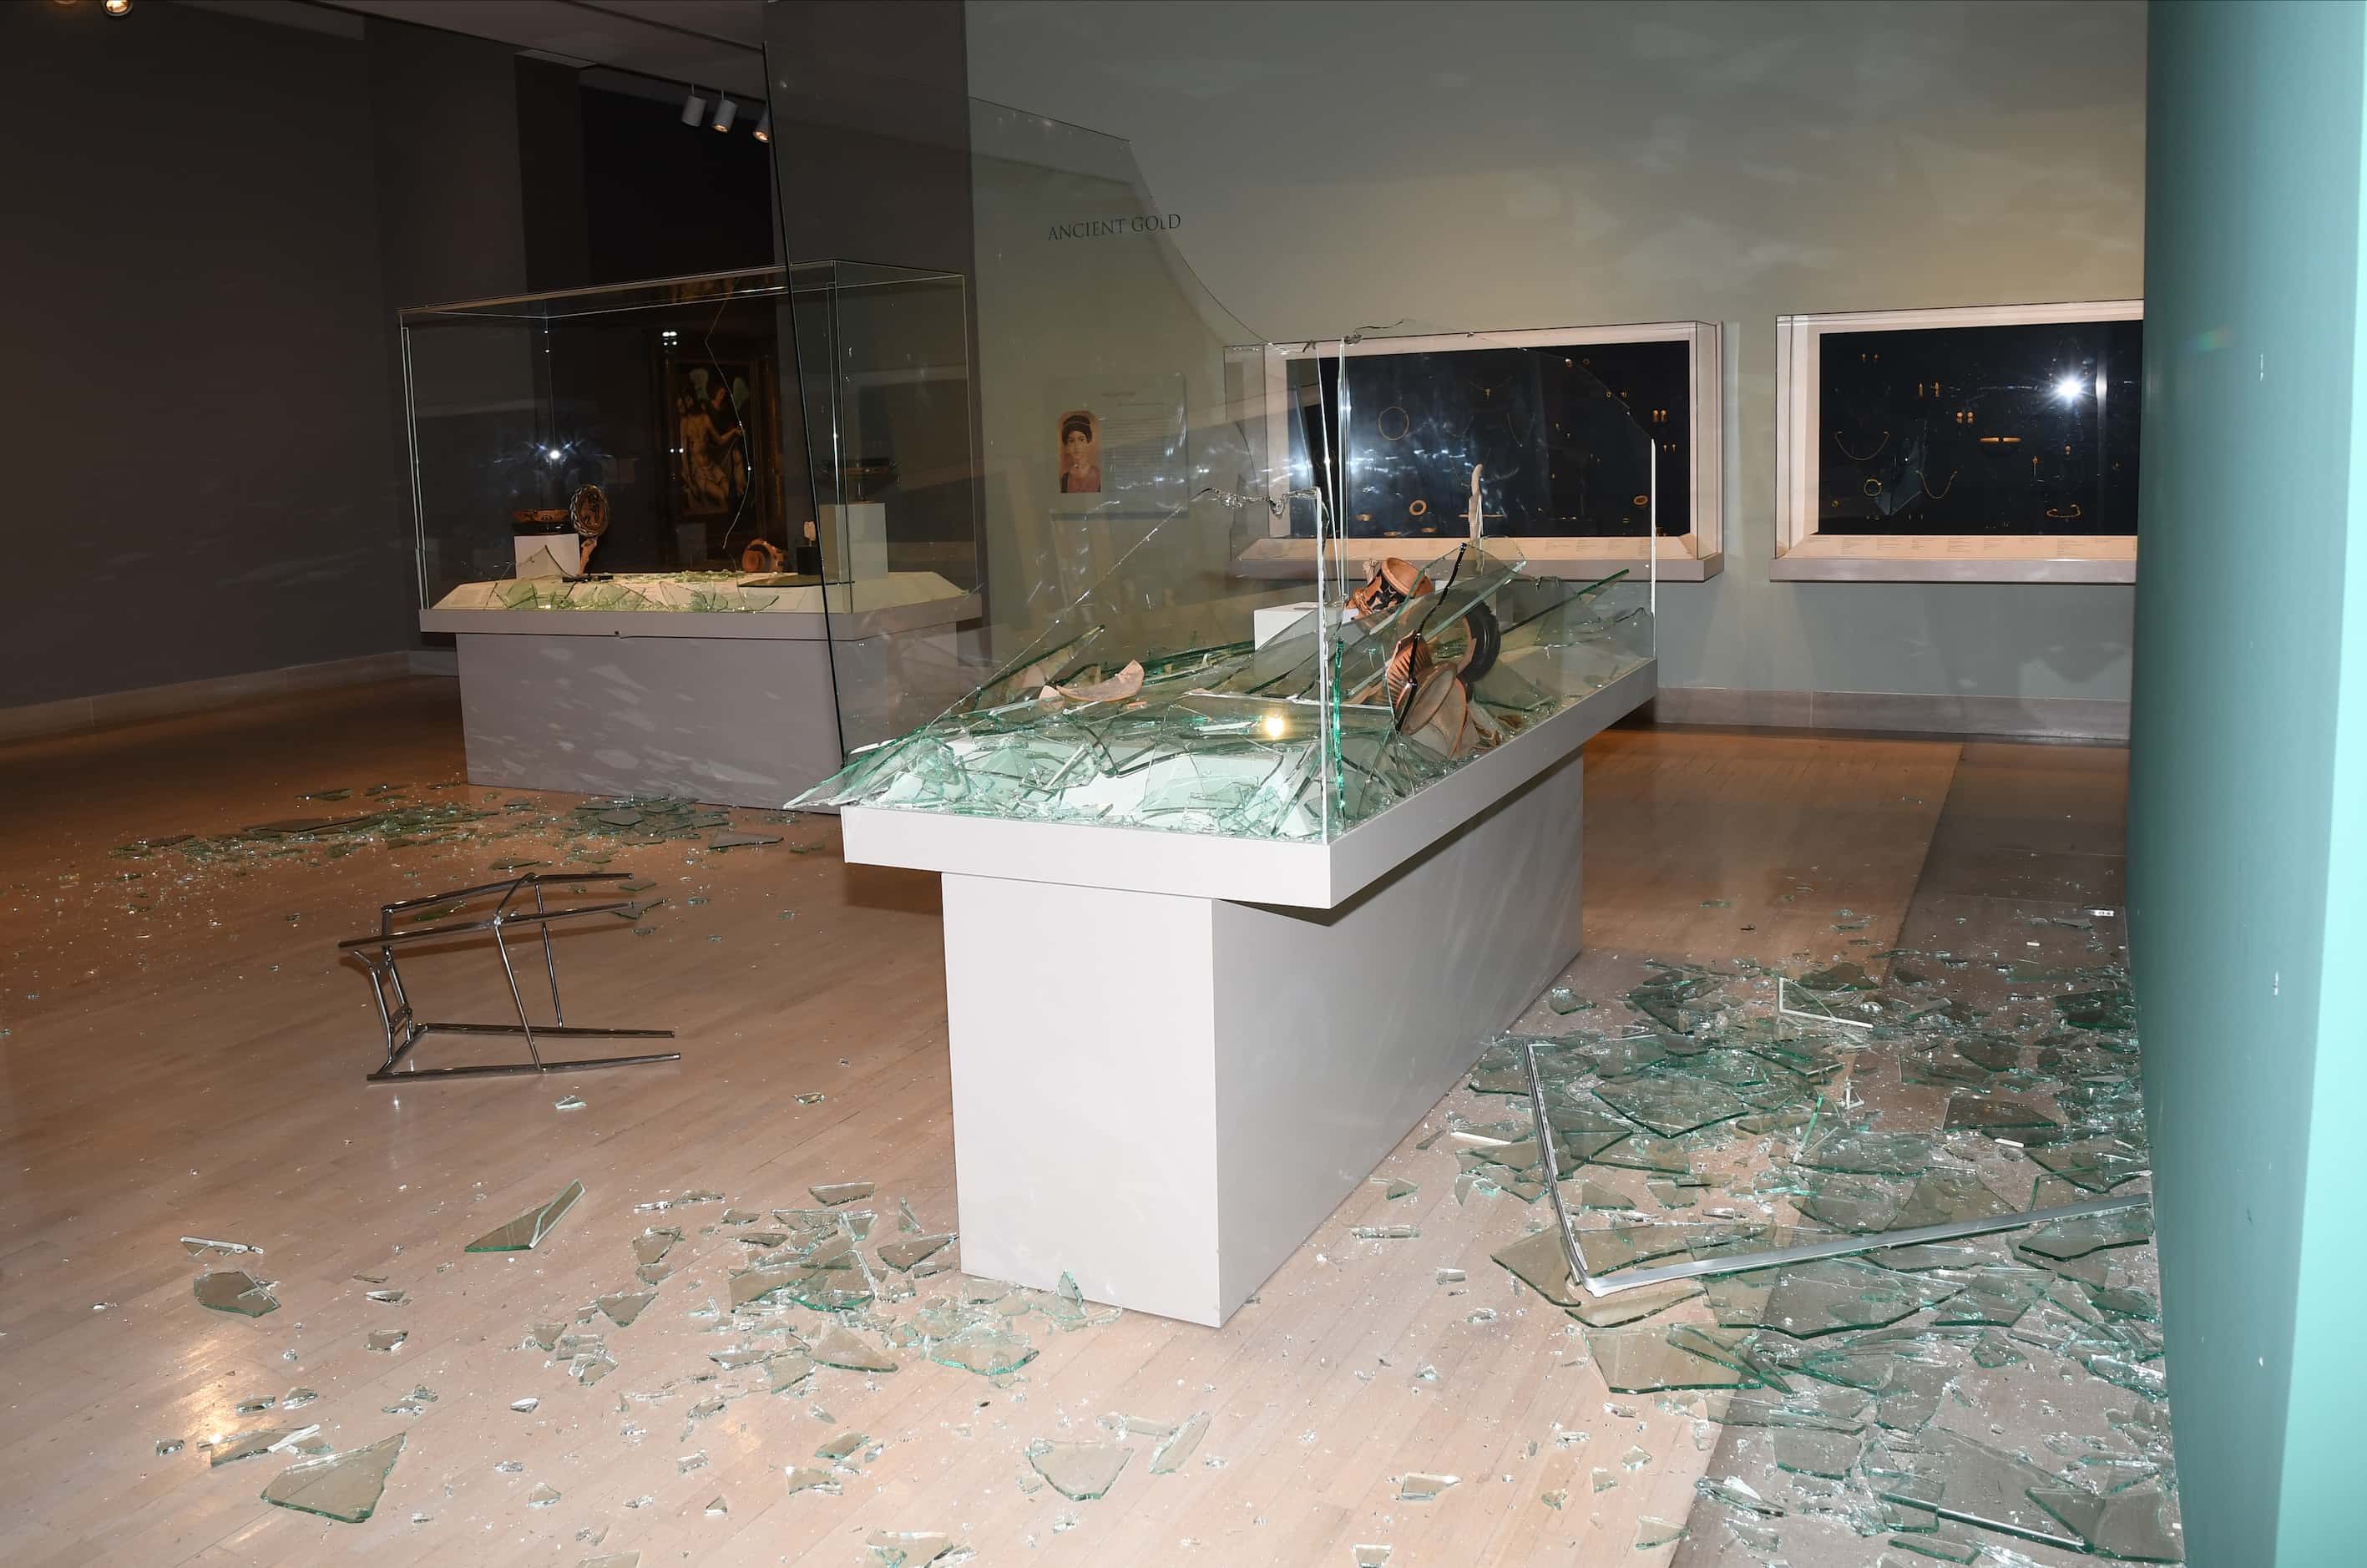 Police said Hernandez punched a glass display case several times in the ancient...